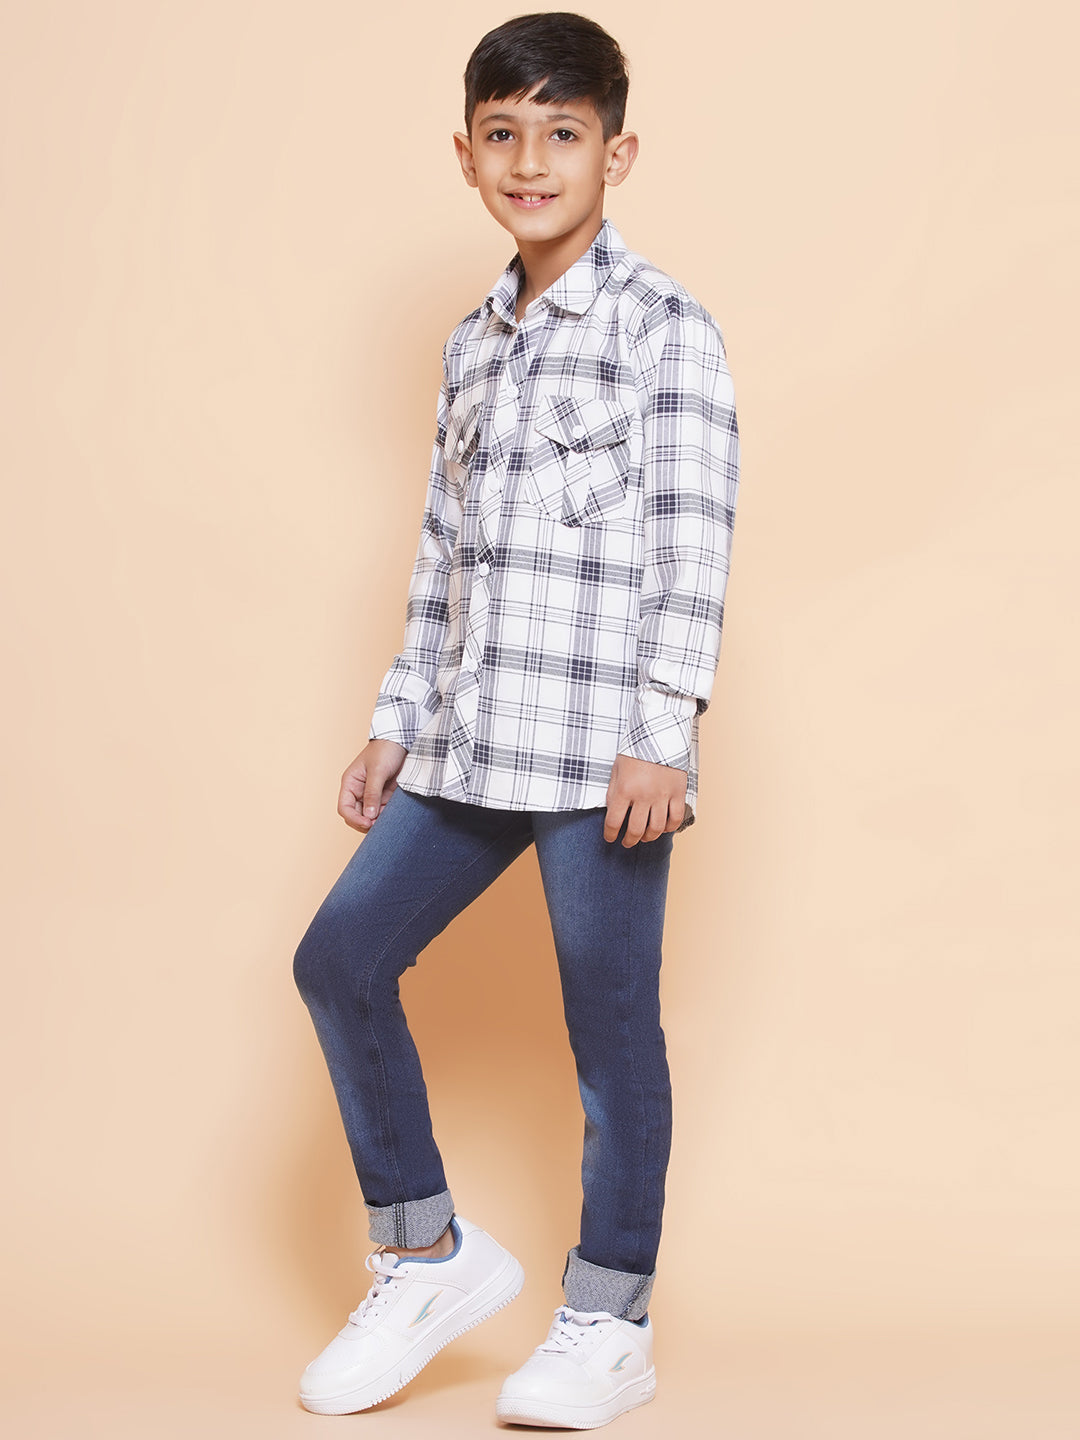 Kids White Shirt and Jeans Clothing Set For Boys